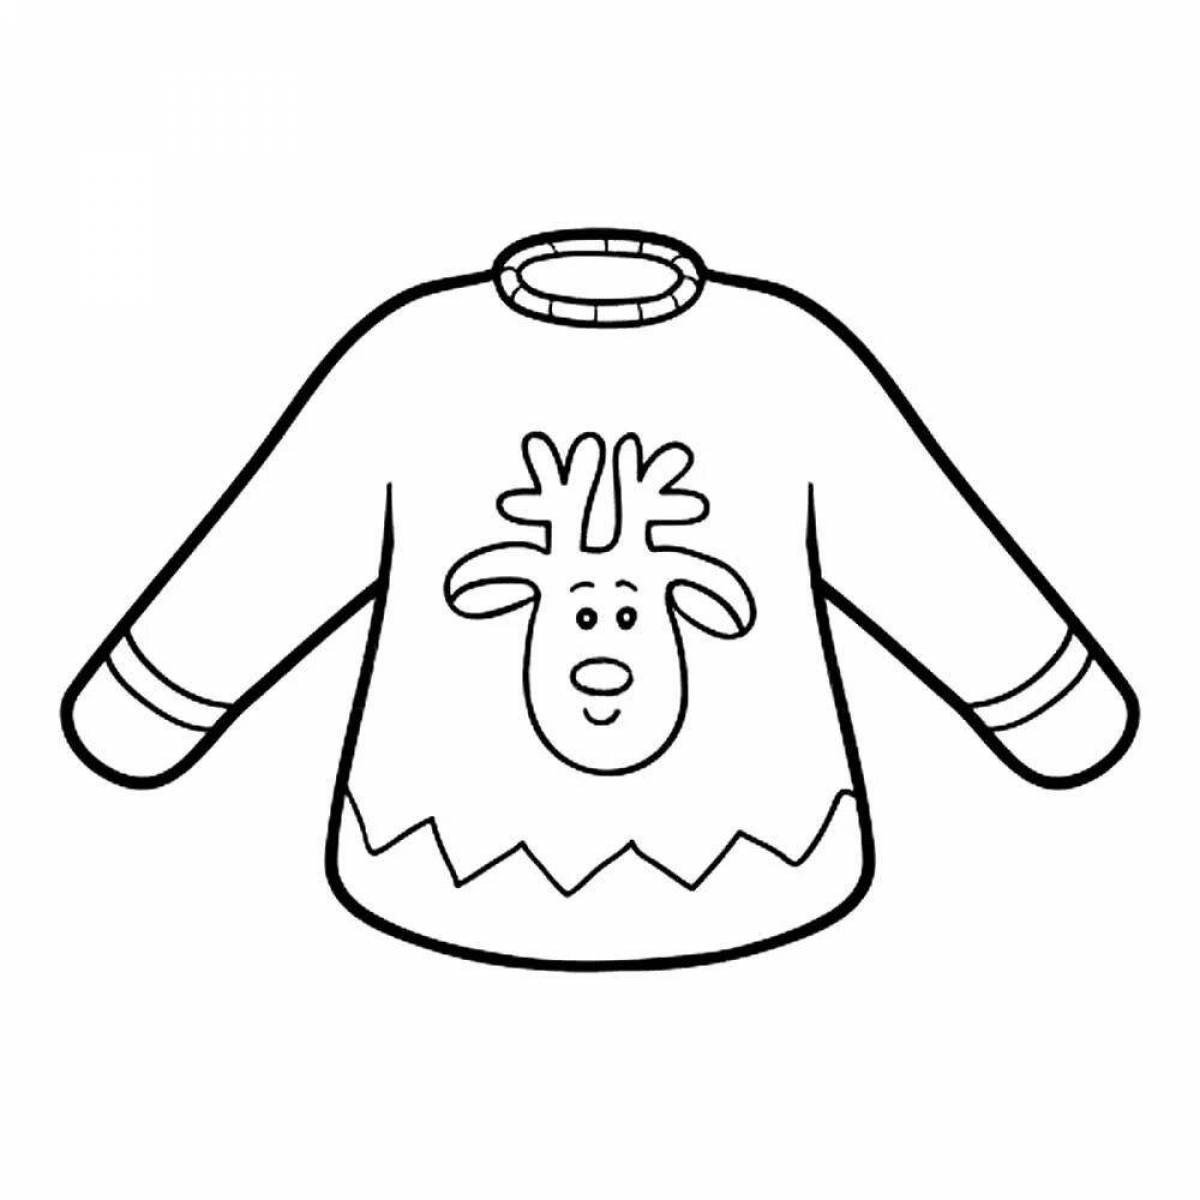 Gorgeous sweater coloring page for 4-5 year olds